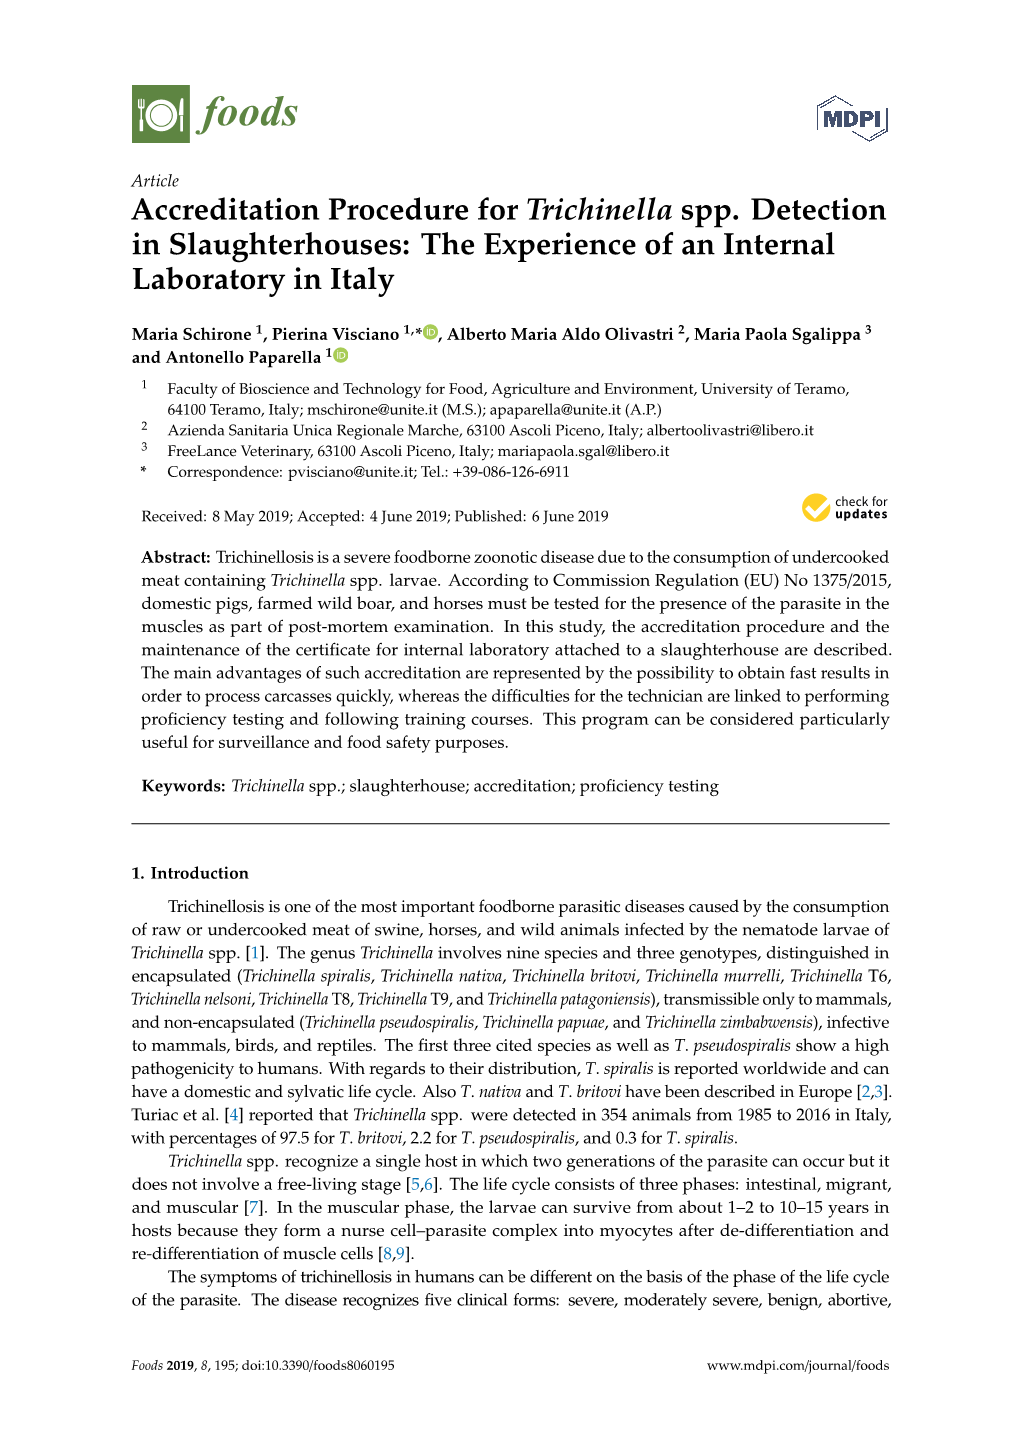 Accreditation Procedure for Trichinella Spp. Detection in Slaughterhouses: the Experience of an Internal Laboratory in Italy